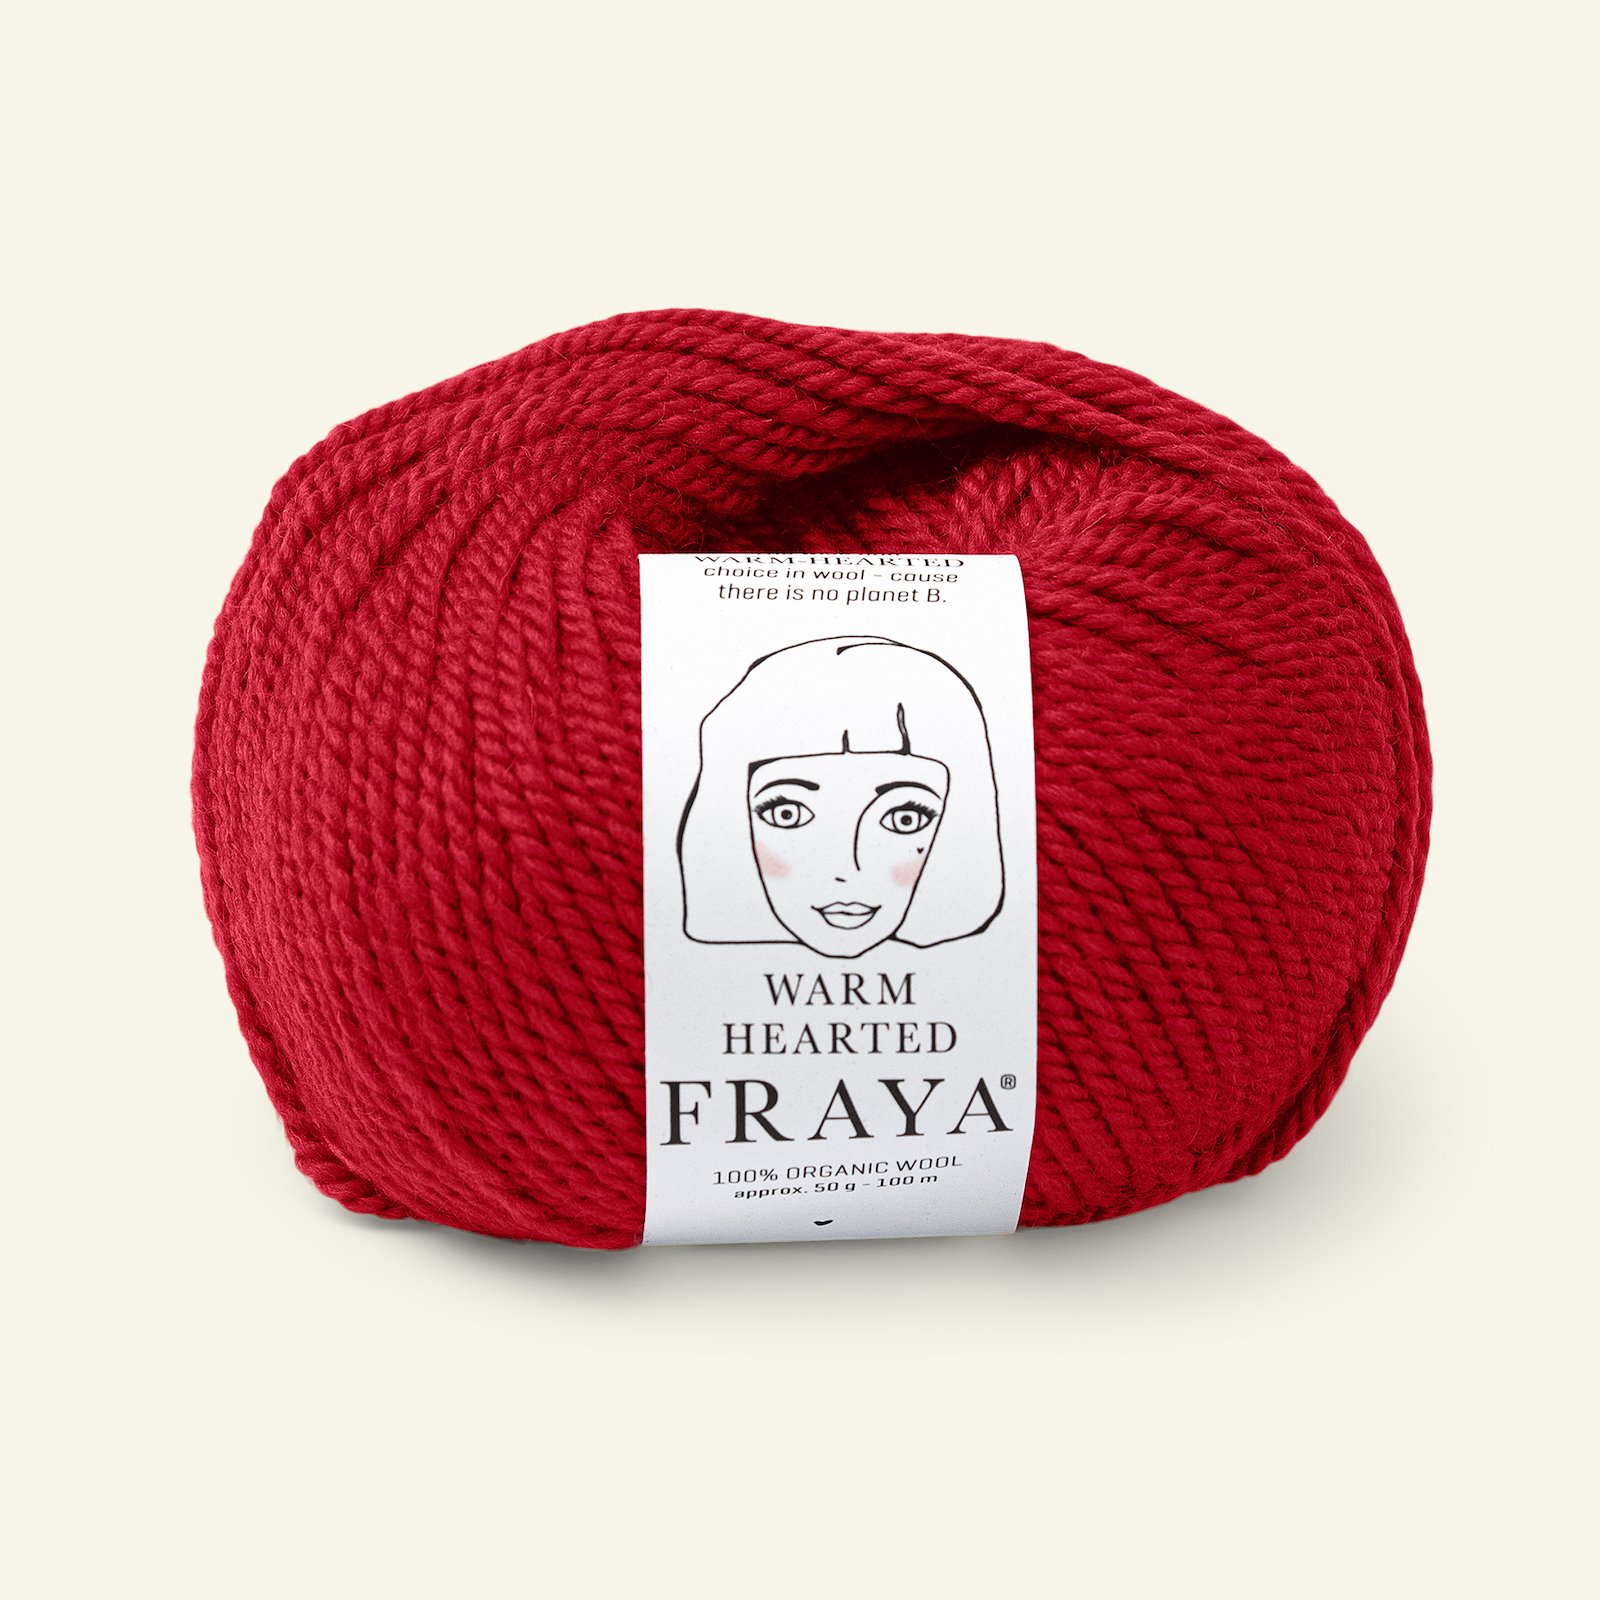 FRAYA, Wolle 100% Bio Wolle "Warm Hearted", dunkelrot 90000925_pack